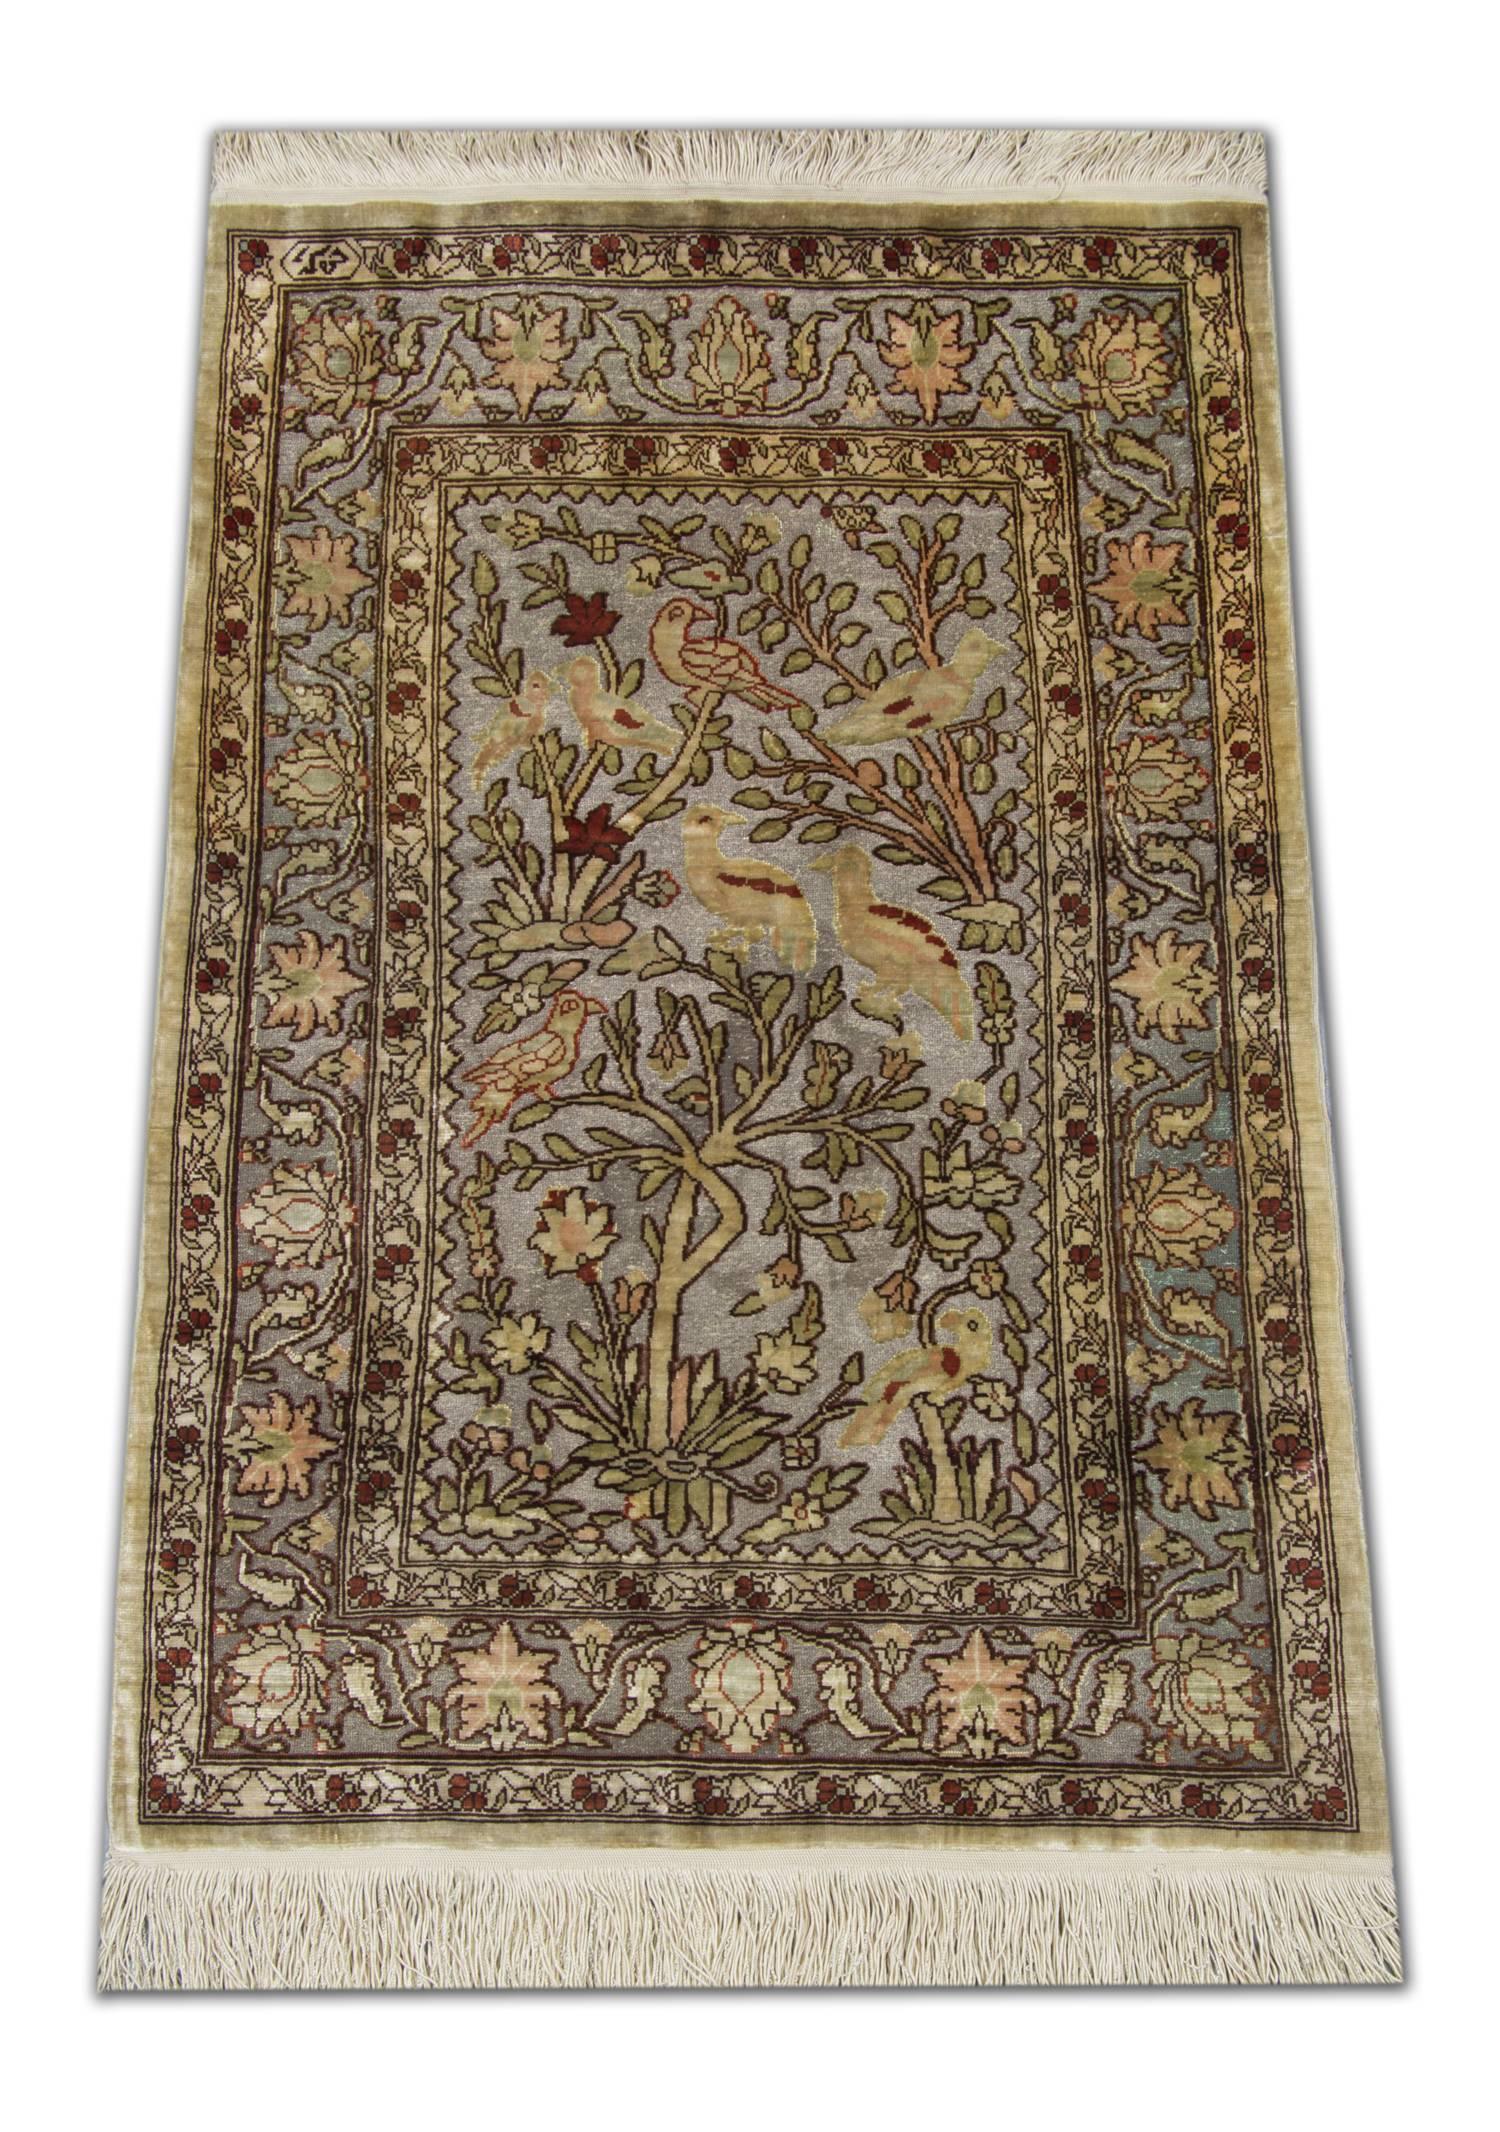 This oriental rug for sale was woven in Asian Anatolia, Turkey in the historic city of Hereke. In the mid-19th century, Sultan Abdul Majid proclaimed Hereke to be the royal weaving village. The small rugs were woven there were considered the finest